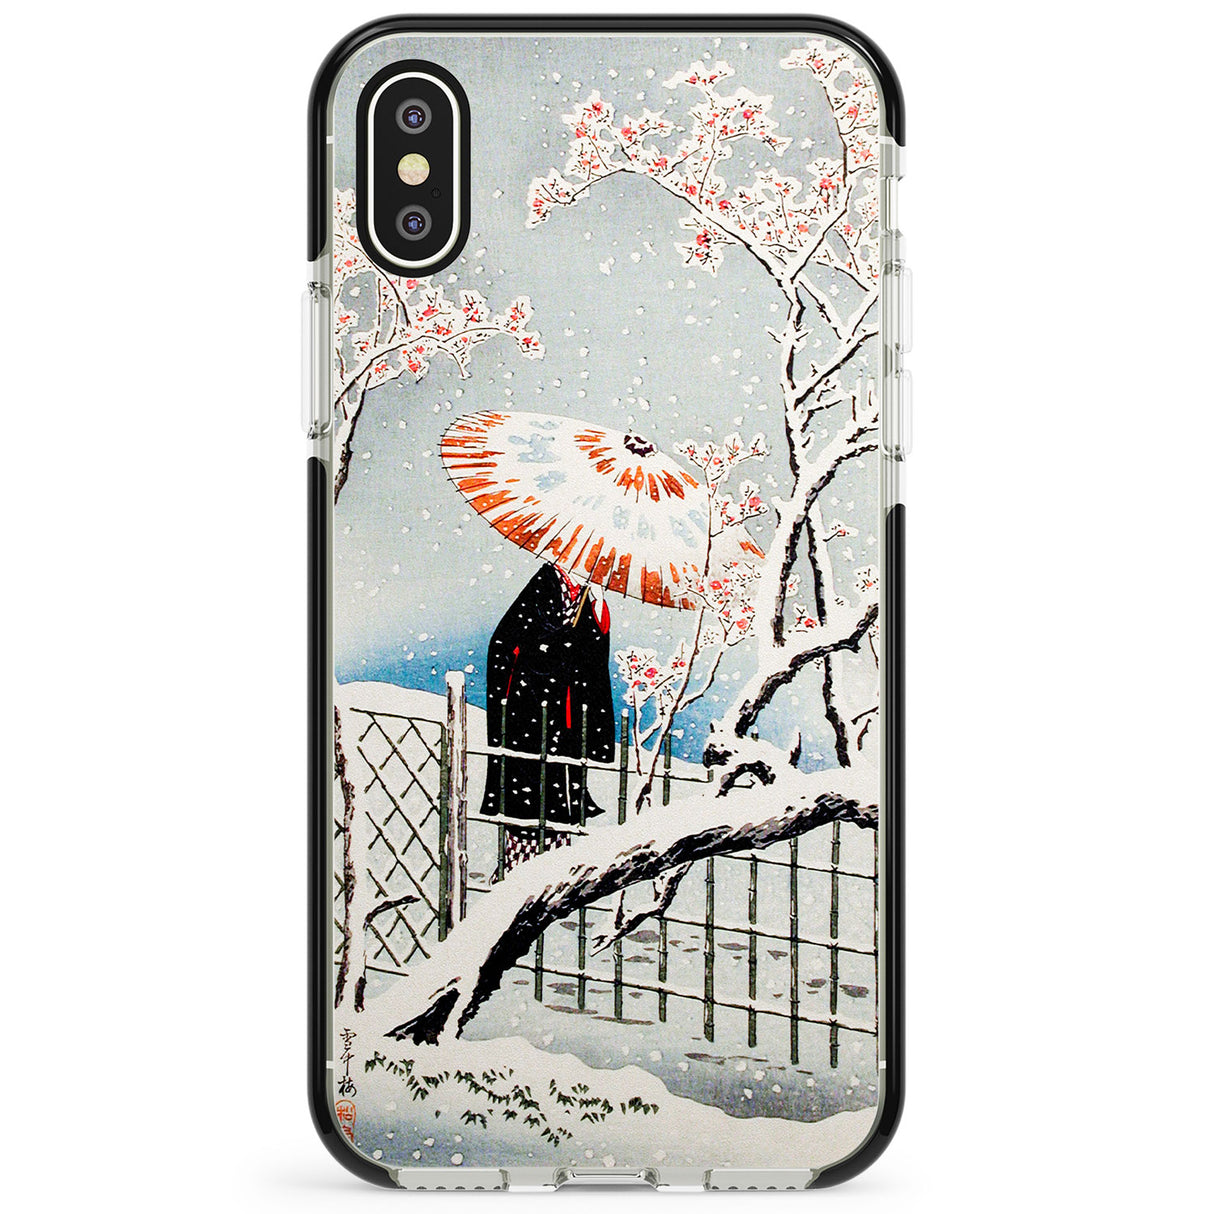 Plum Tree in Snow by Hiroaki Takahashi Phone Case for iPhone X XS Max XR